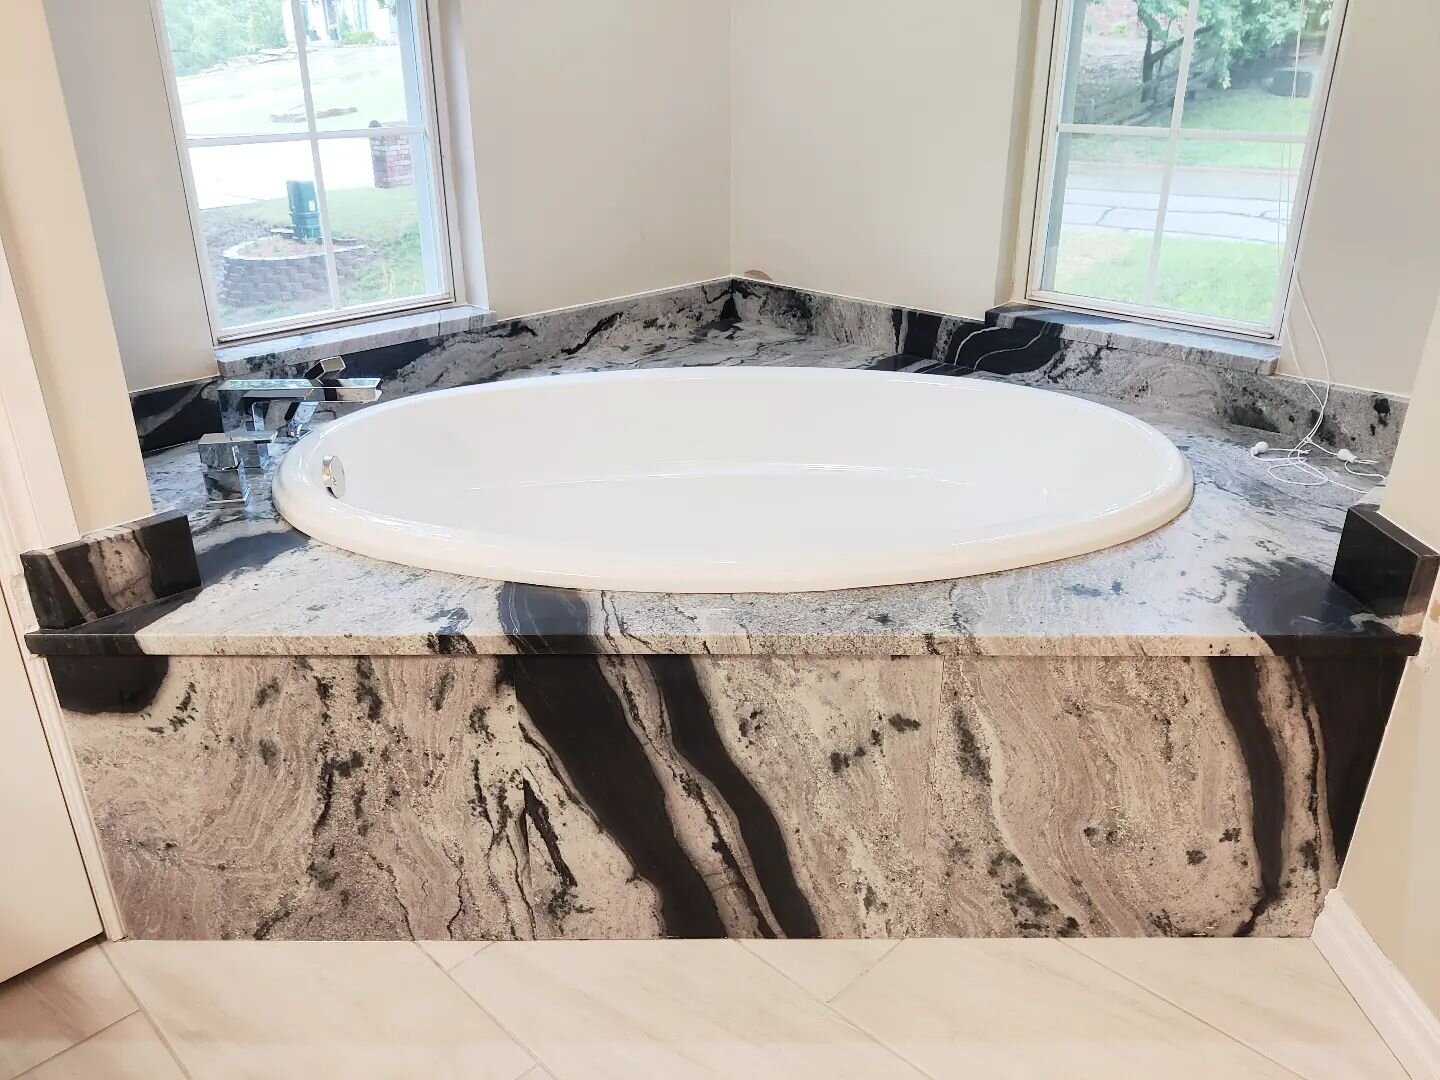 This tub deck was made with Eclipse leathered granite from @pacificshorestonestulsa the three pieces for the front panel lined up despite coming out of different parts of the slab and waterfall almost perfectly. If it's a big enough slab, we can prob